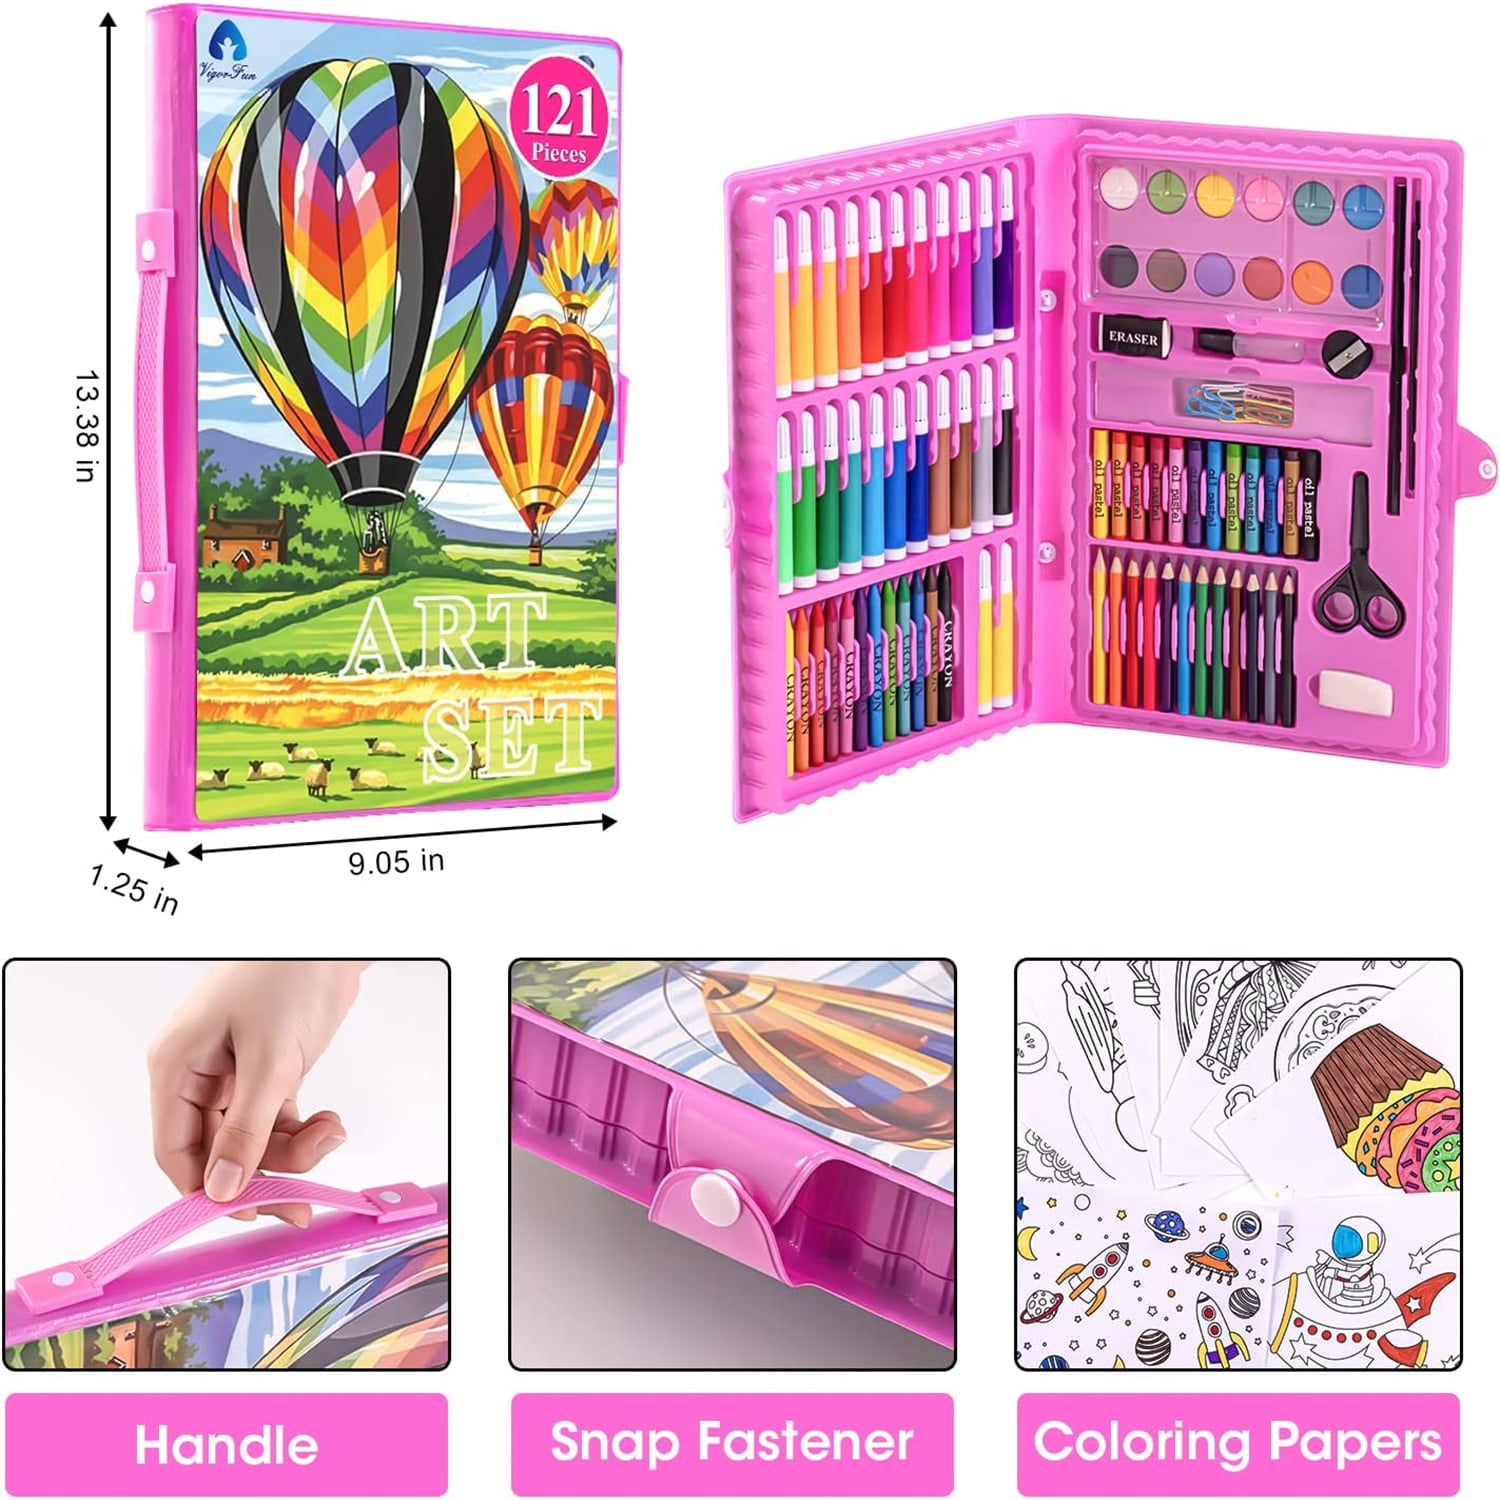 Art Kit, VigorFun 121 Piece Drawing Painting Art Supplies for Kids Girls Boys Teens, Gifts Art Set Case Includes Oil Pastels, Crayons, Colored Pencils